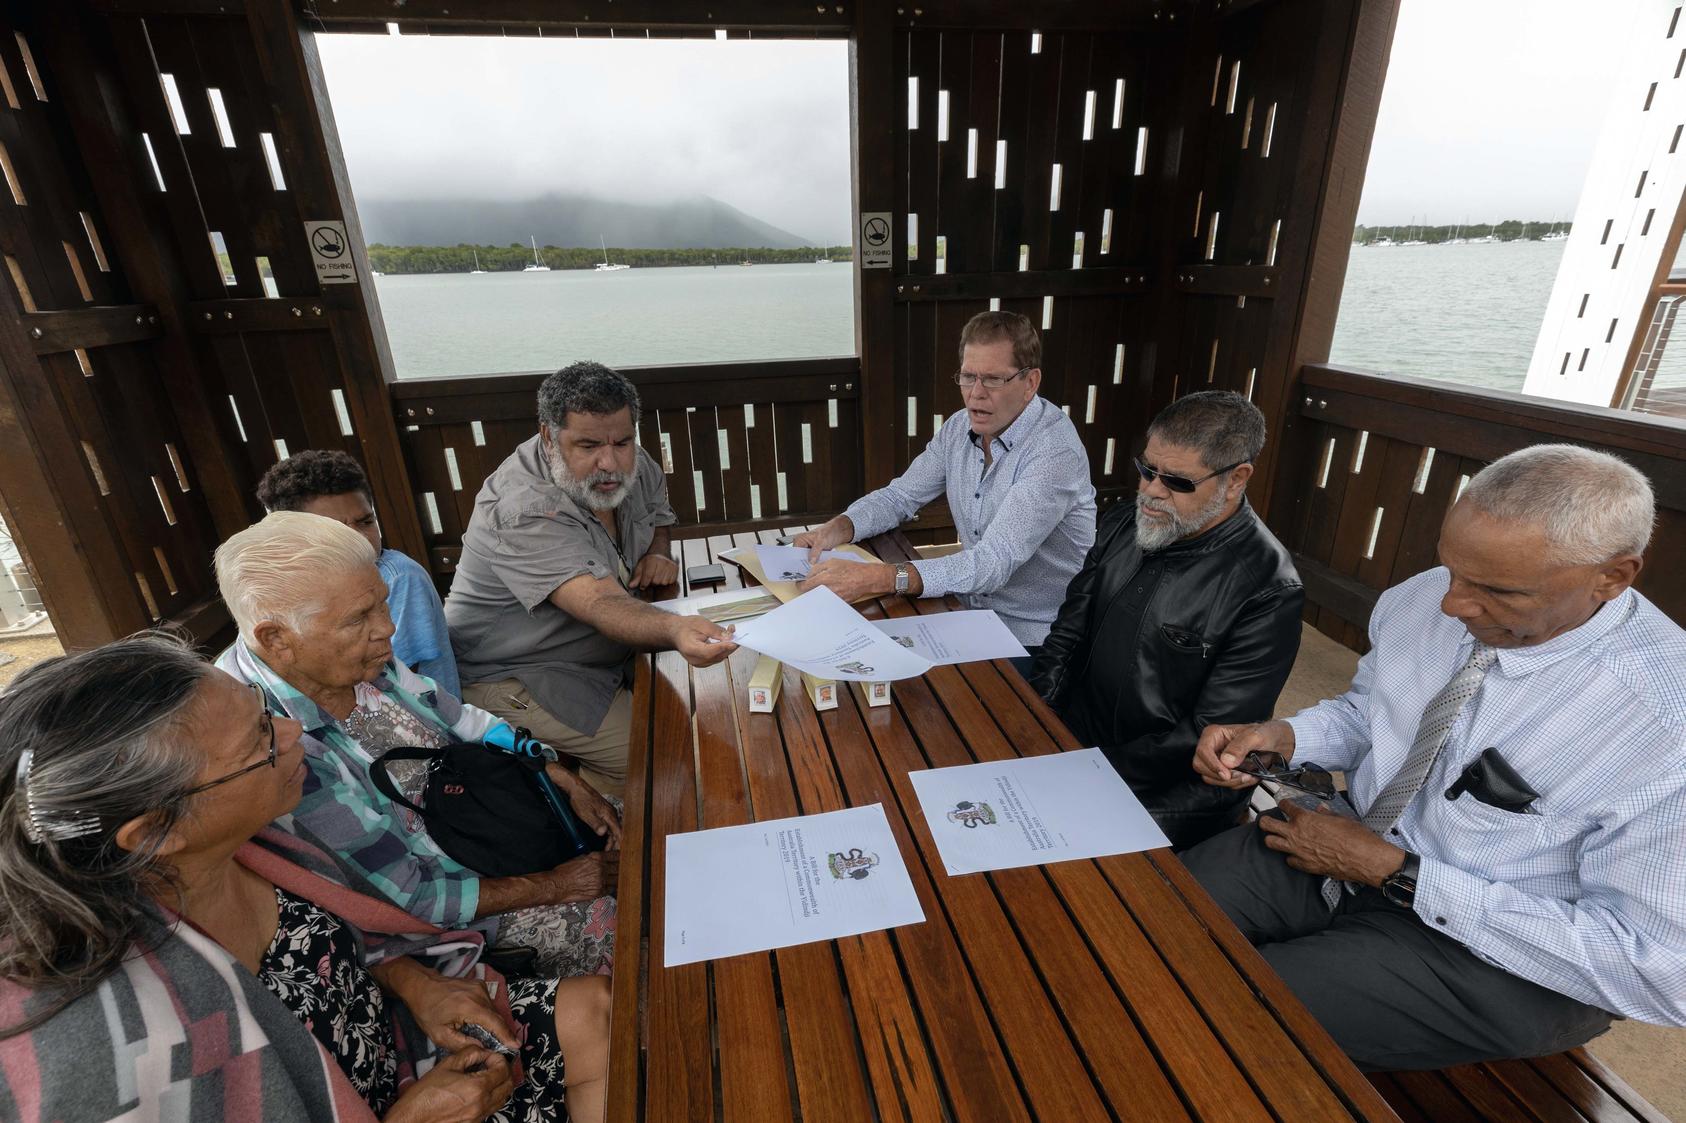 : Leaders of the Aboriginal-Australian Yidinji Territory at a weekly meeting in Cairns, Australia, discussing their hopes to sign a treaty with the Australian government. August 7, 2019. (Brook Mitchell/The New York Times)